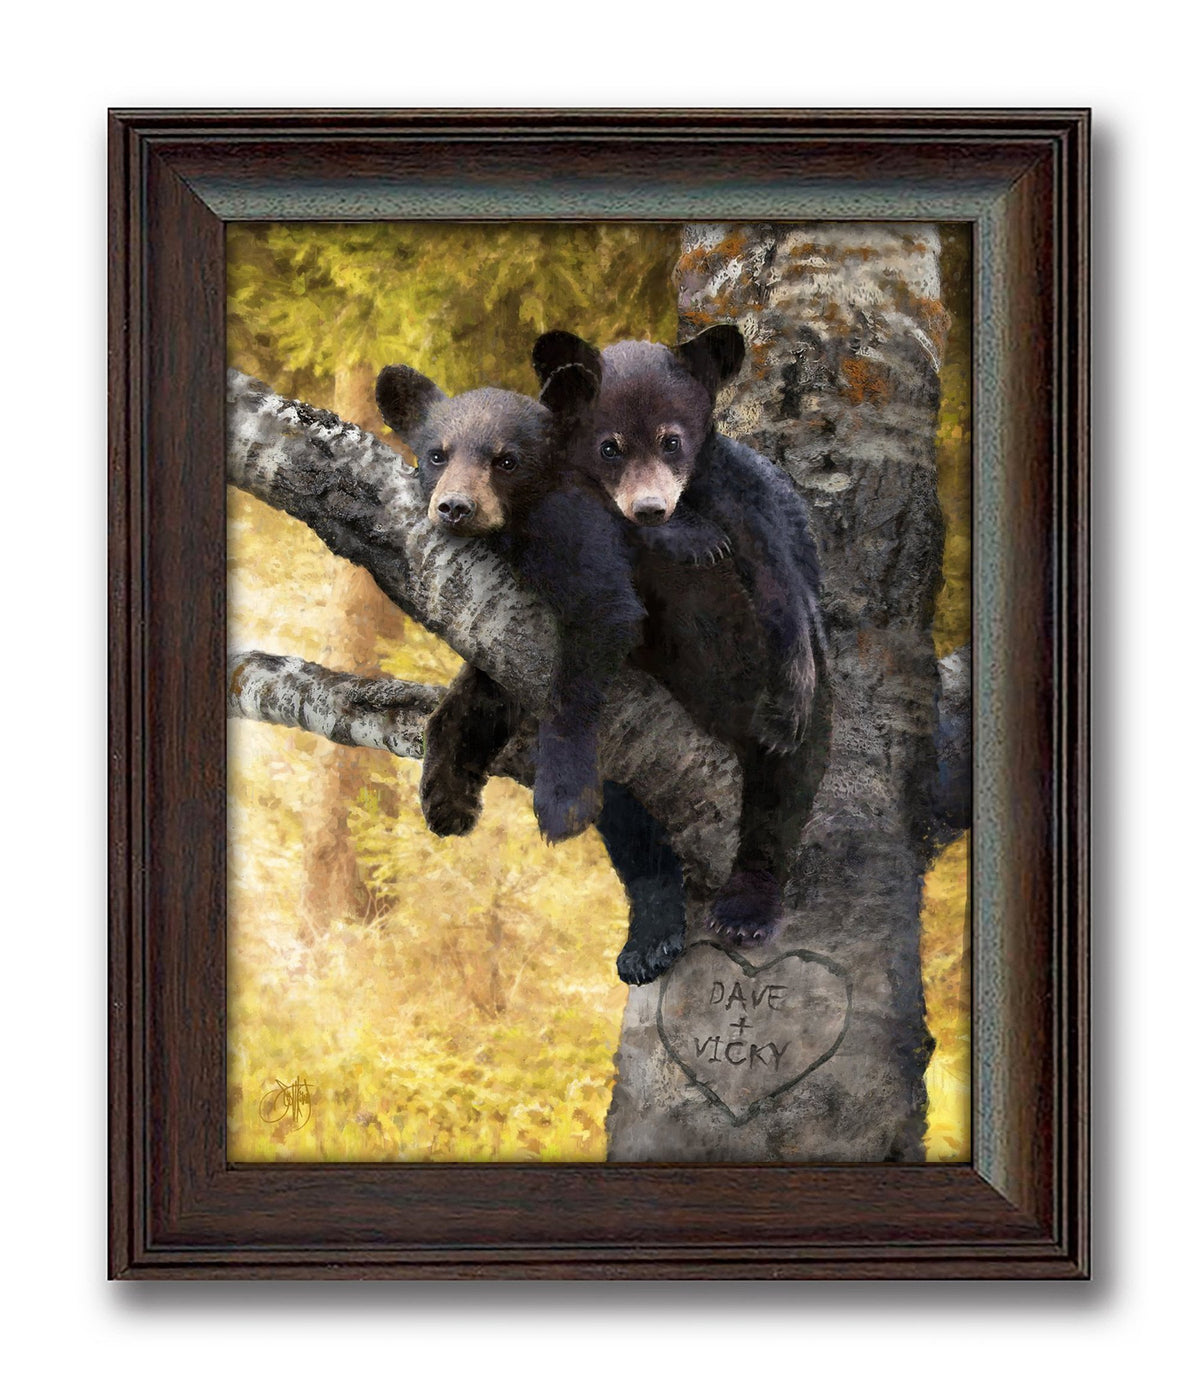 Art print of bears Snuggling in tree with names carved into a tree- framed behind glass